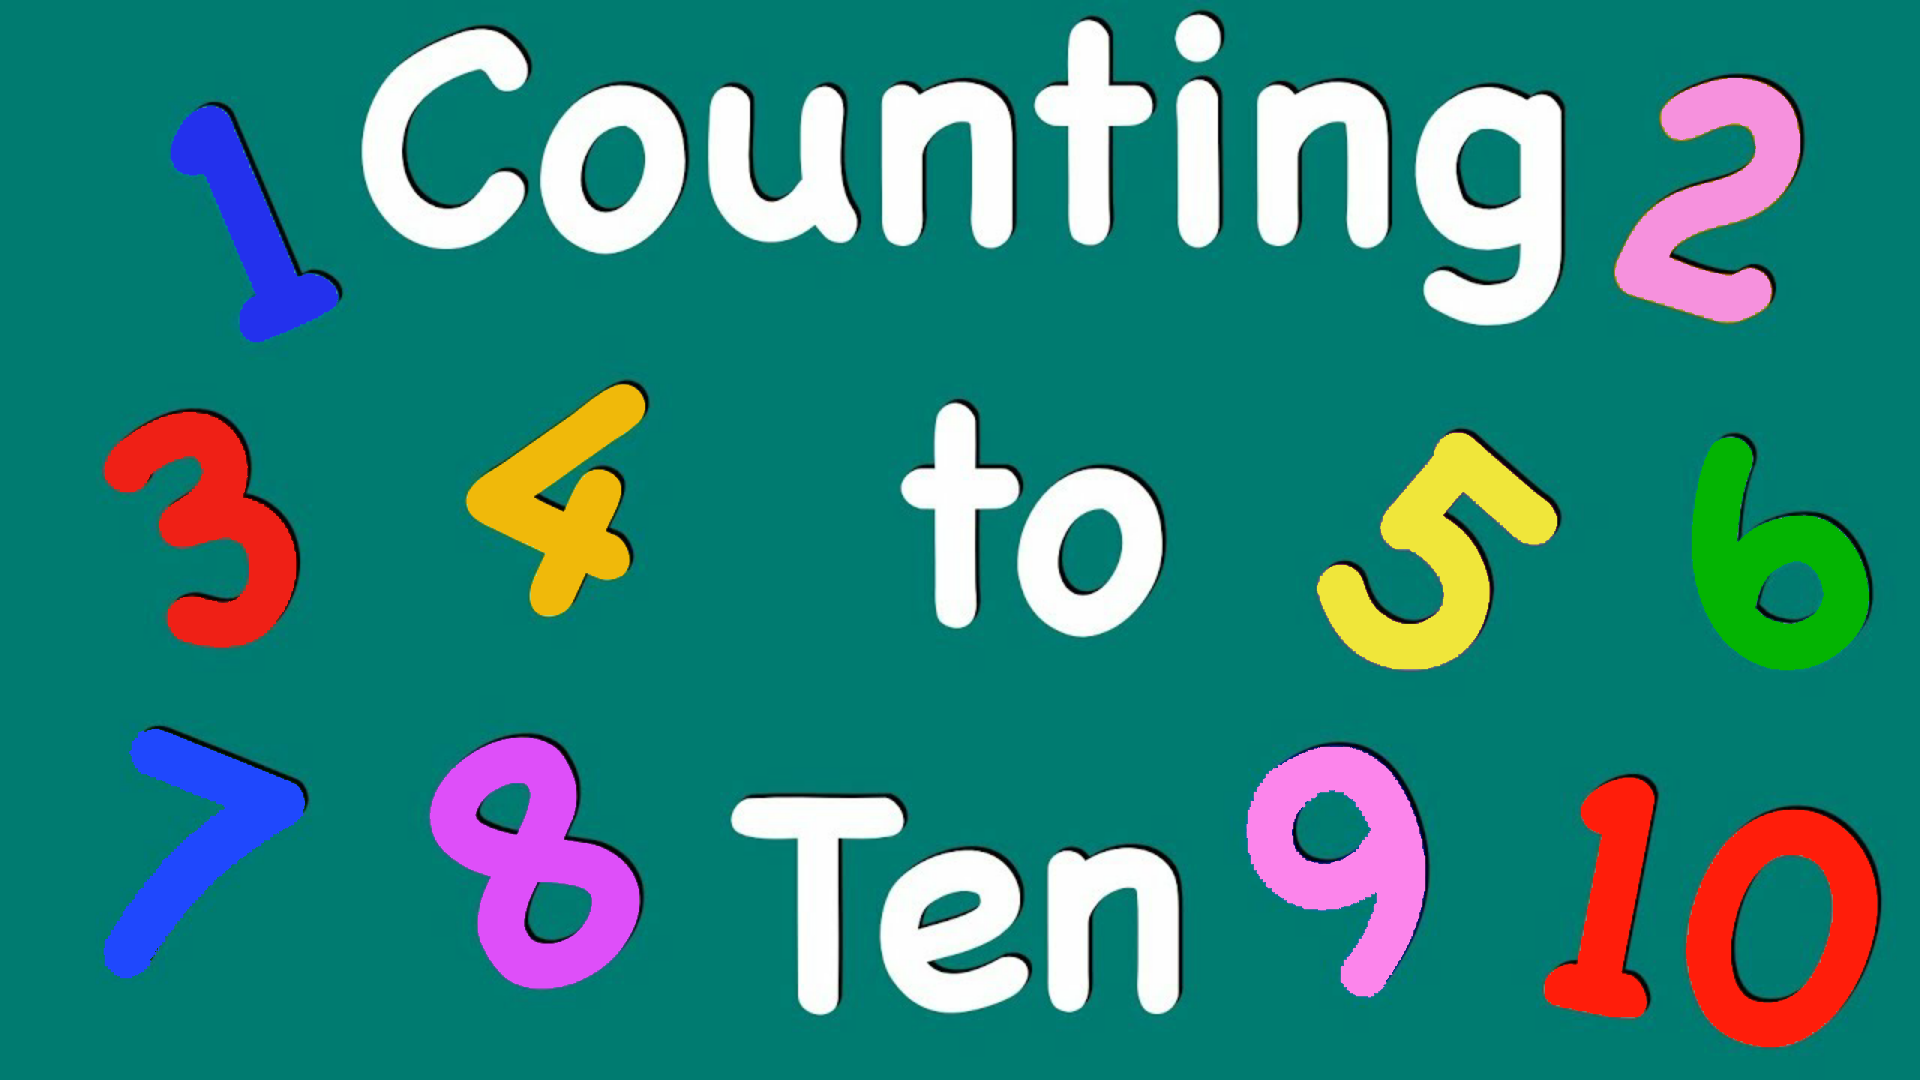 Count ng To Ten Number Recogn t on 1 10 For K ds Nursery Rhymes Fan 